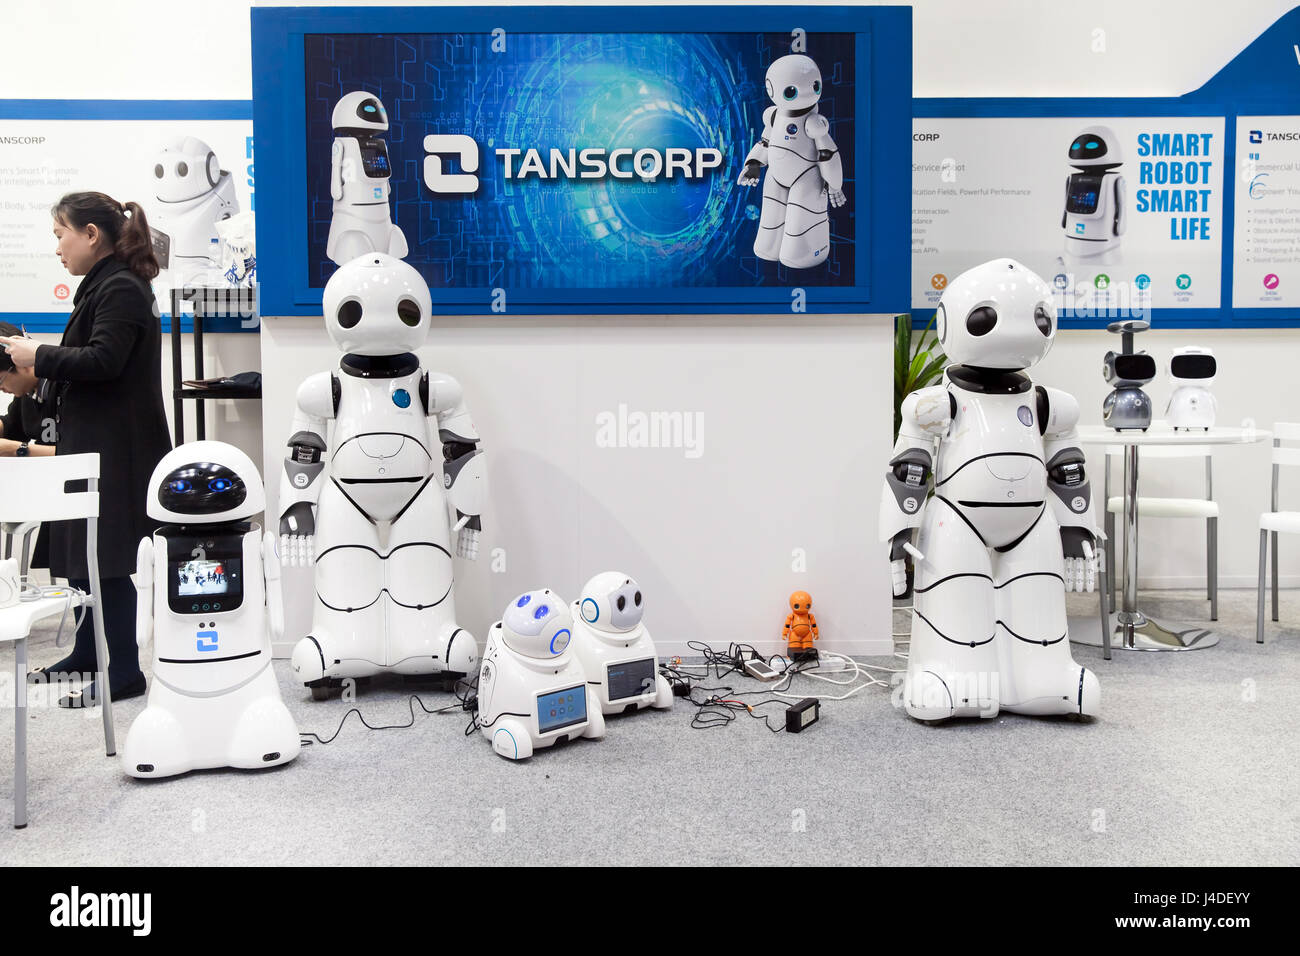 Smart robot UU dancing. Shenzhen Tanscorp technology company on exhibition Cebit 2017 in Hannover Messe, Germany Stock Photo